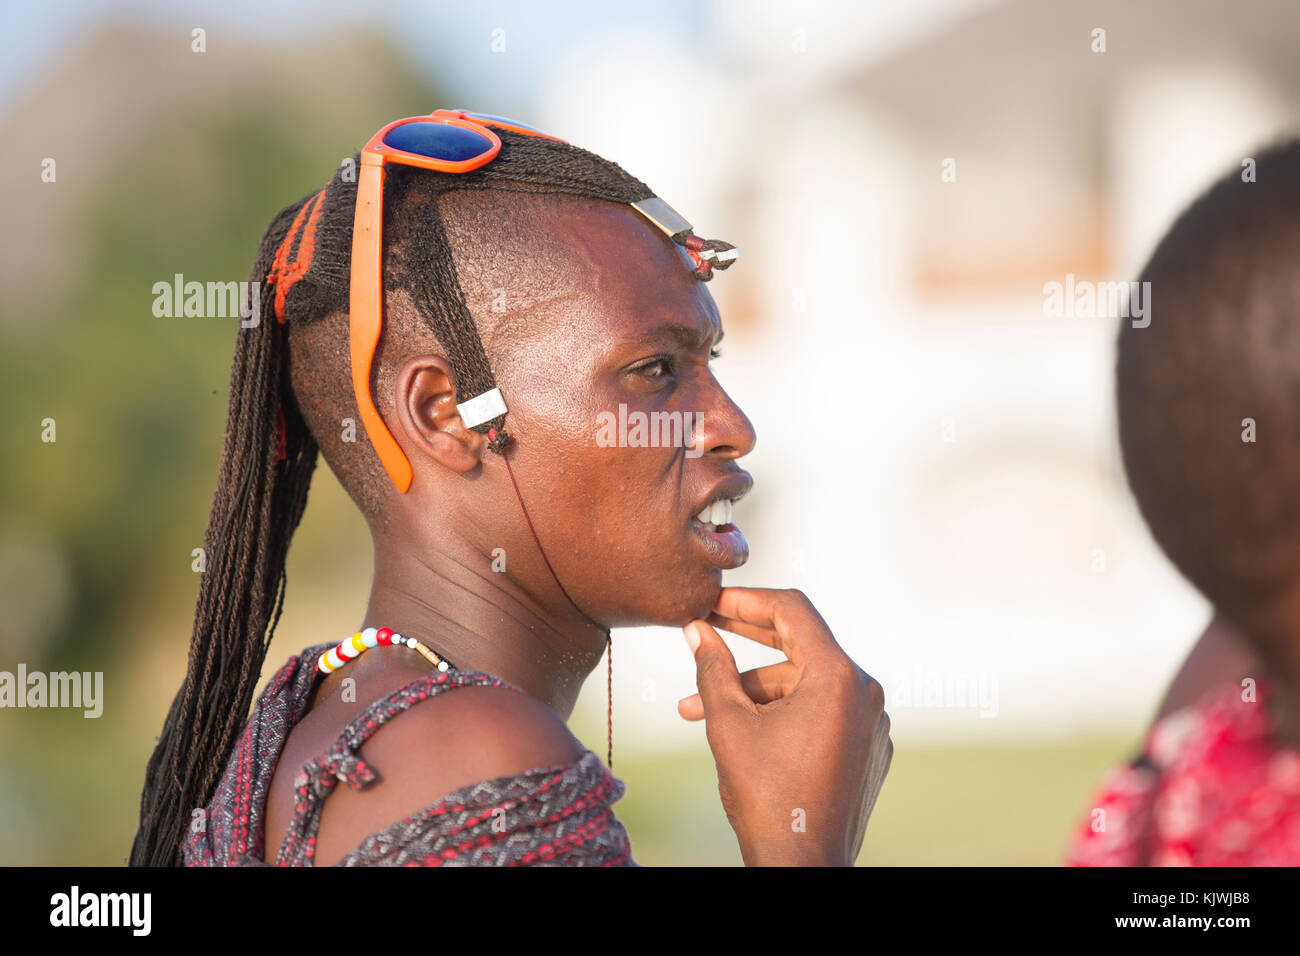 Zanzibar, Tanzania; Young Maasai warriors at a hotel in the north of the island perform for tourists. Stock Photo